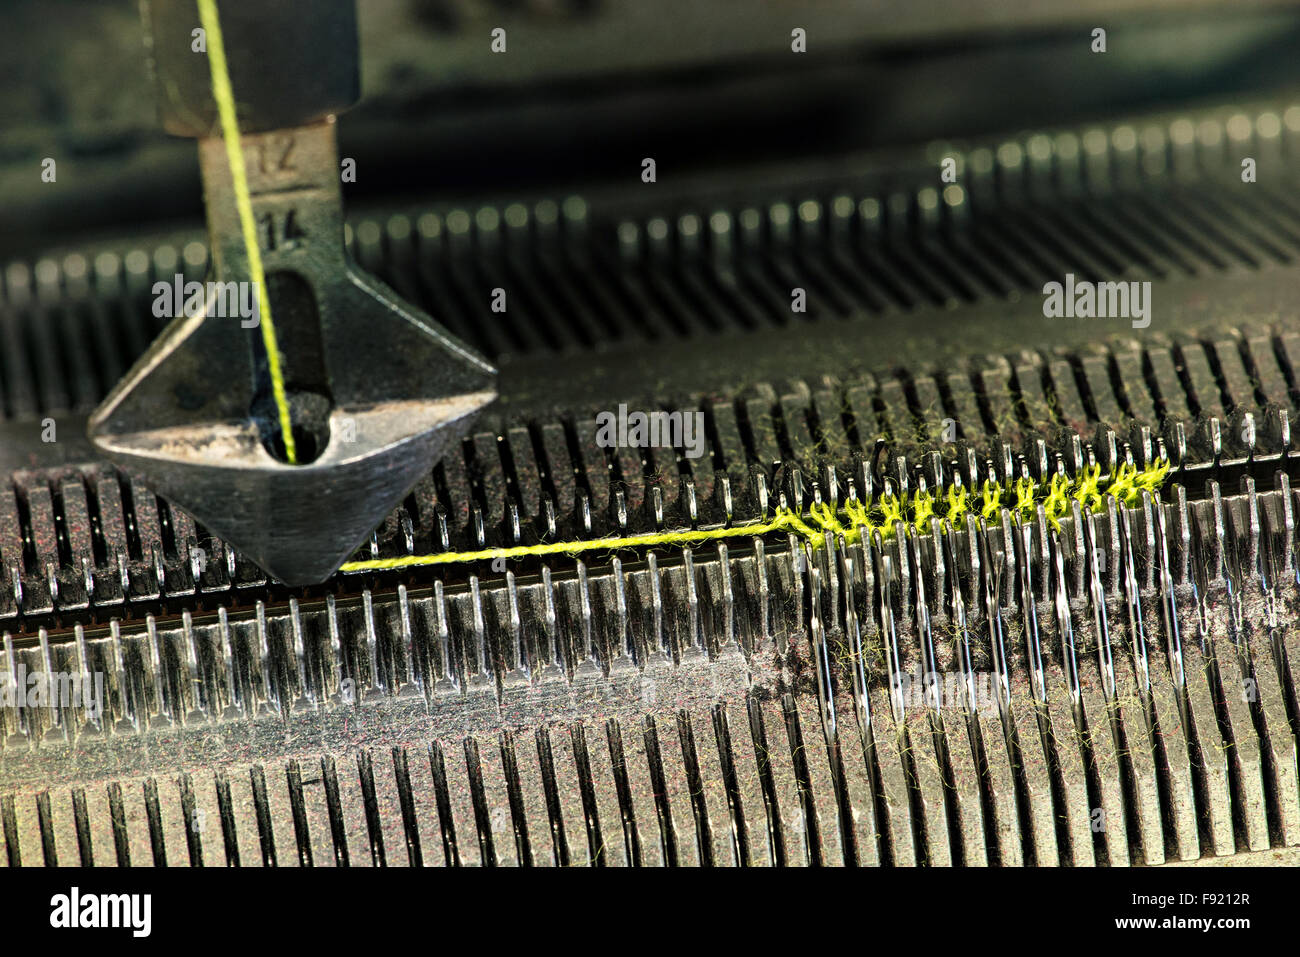 Detail of knitting machine working in a textile concept Stock Photo